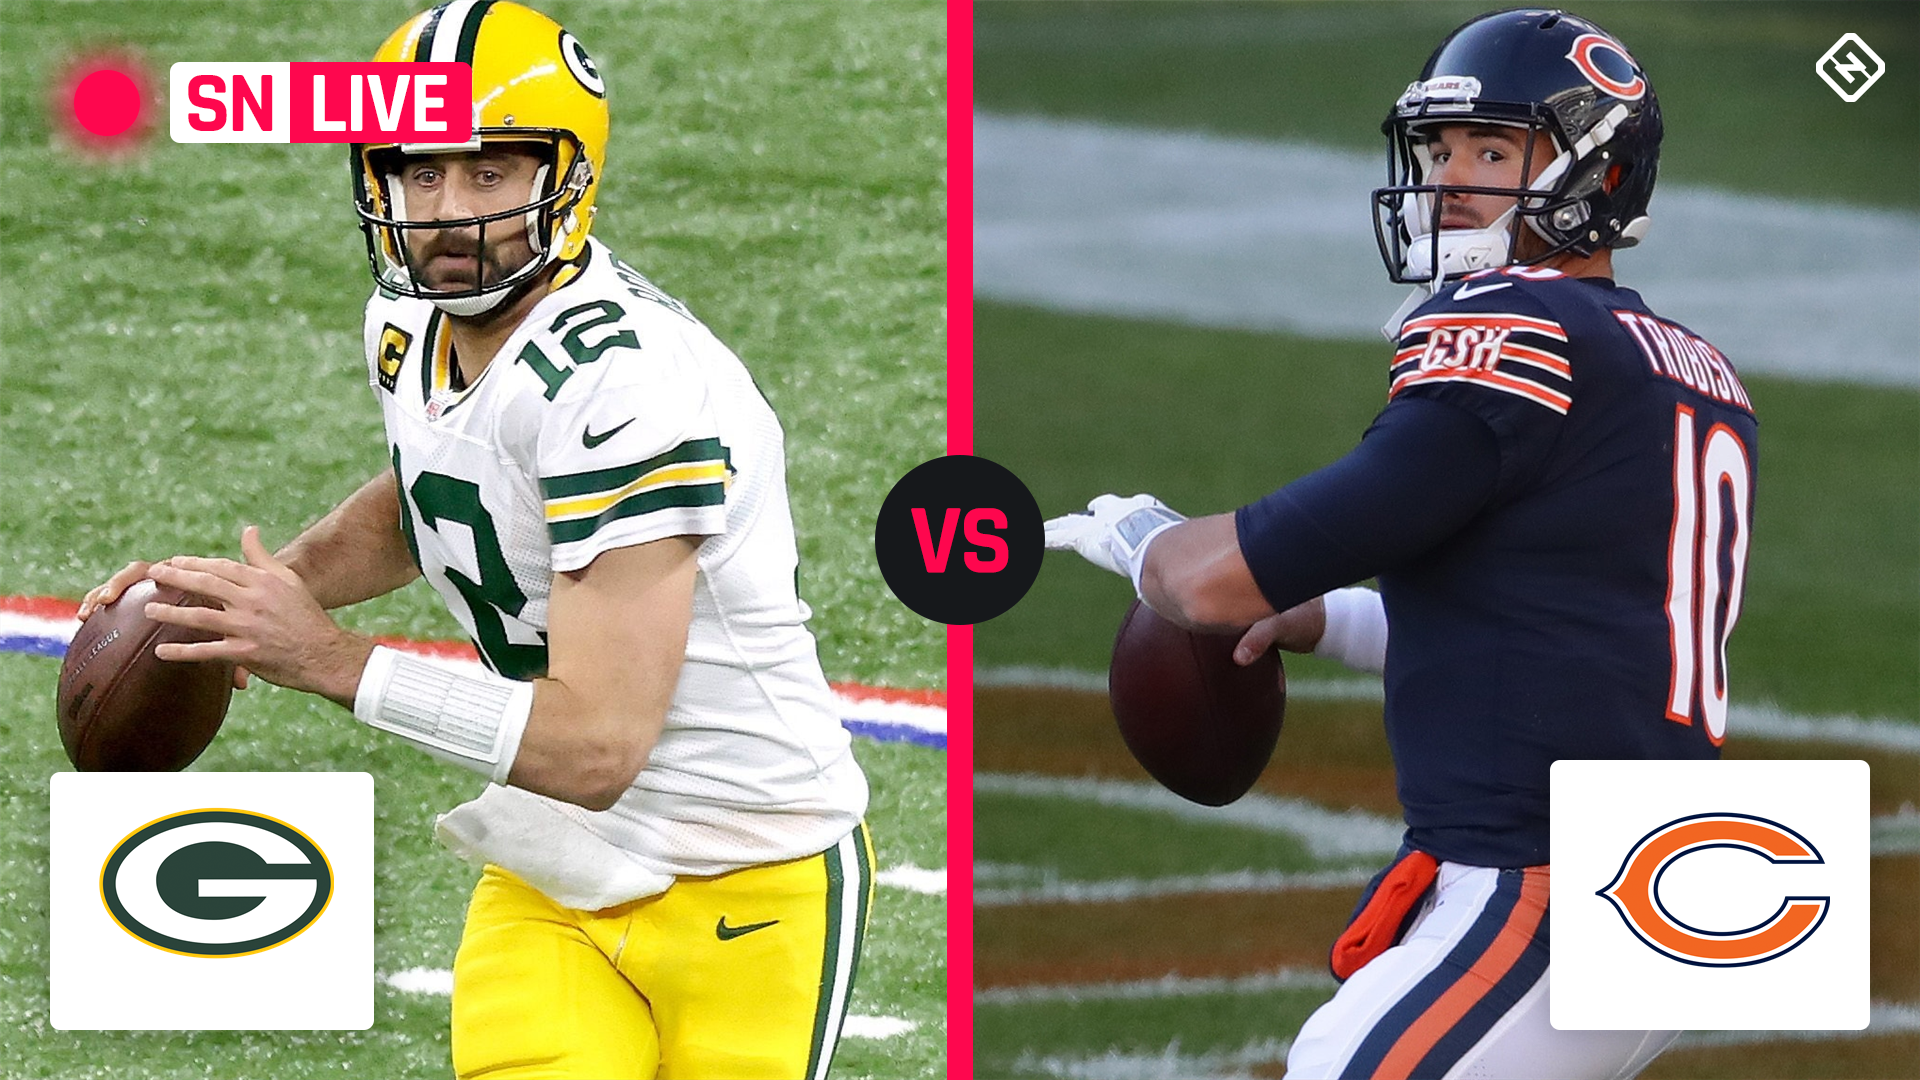 Bears vs. Packers live score, updates, highlights from 'Sunday Night Football' game - Sporting News